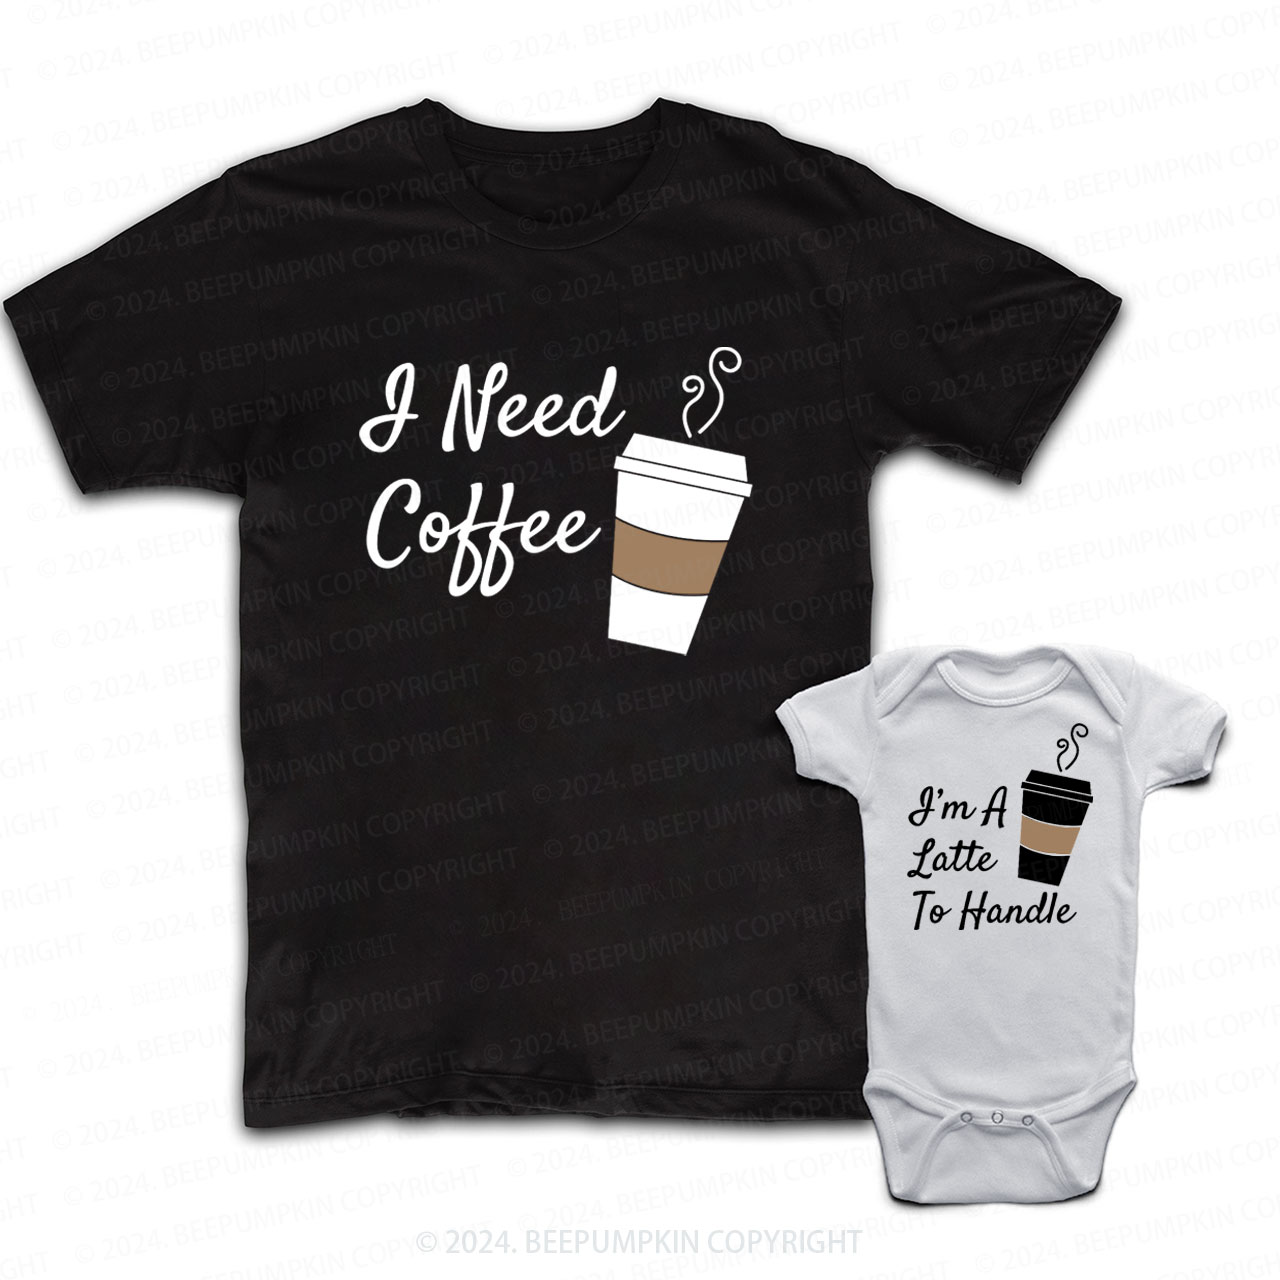 I'm A Latte To Handle Daddy And Me Matching Shirt